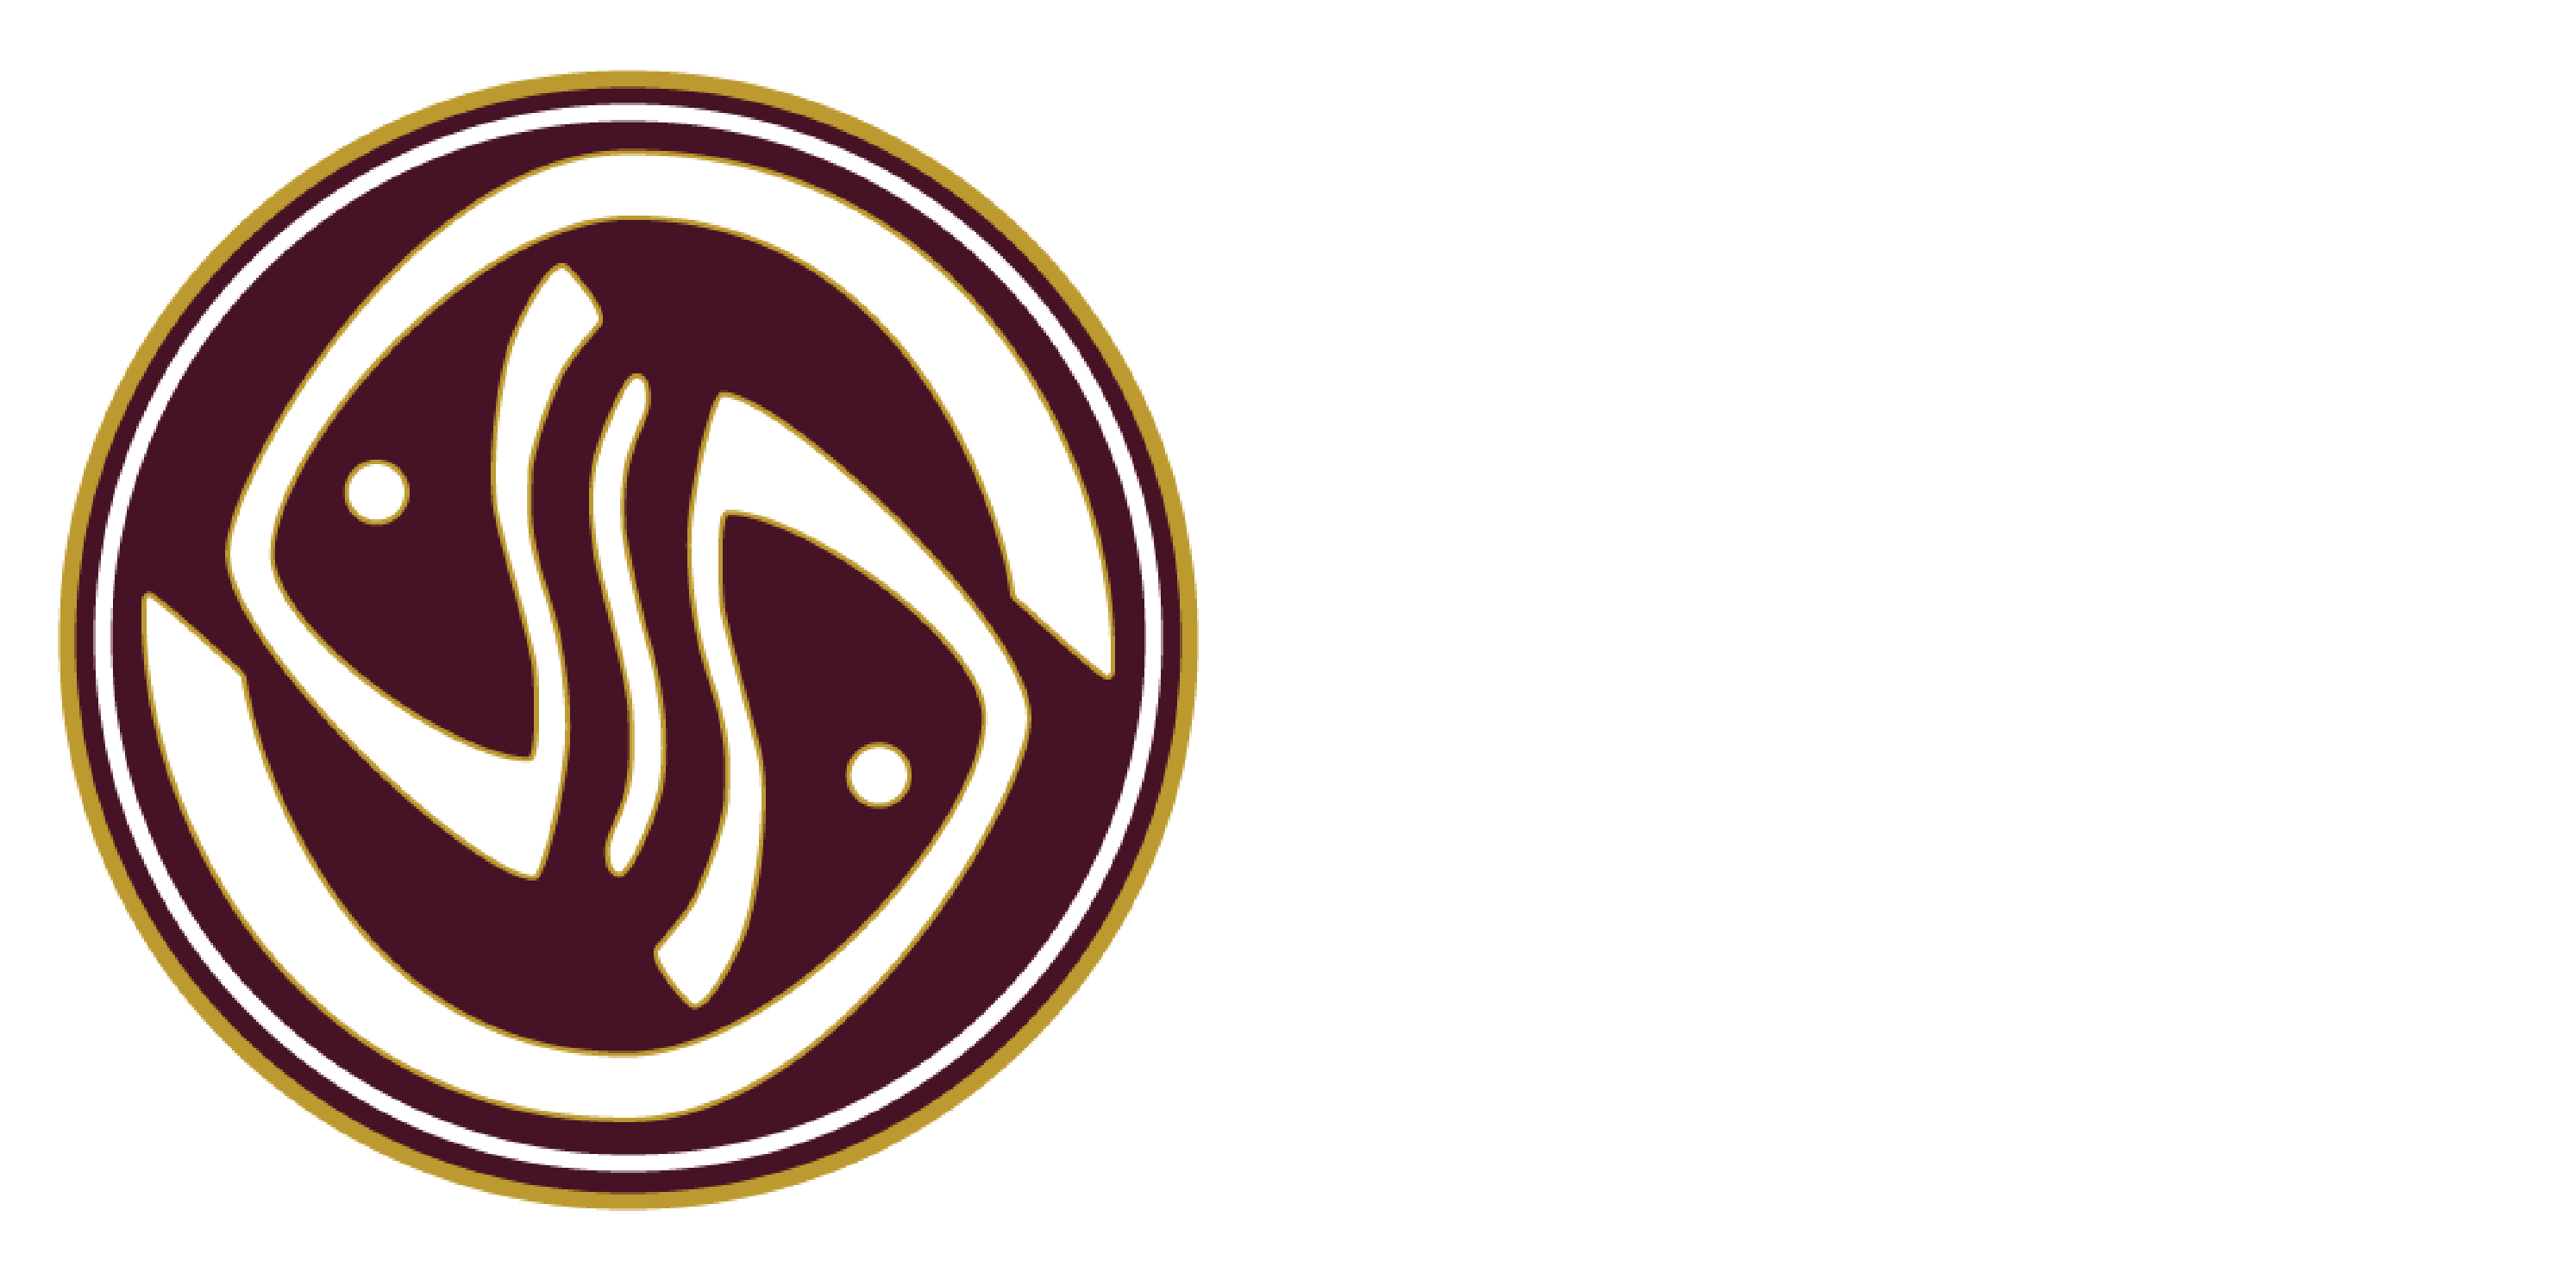 The Aligned Space